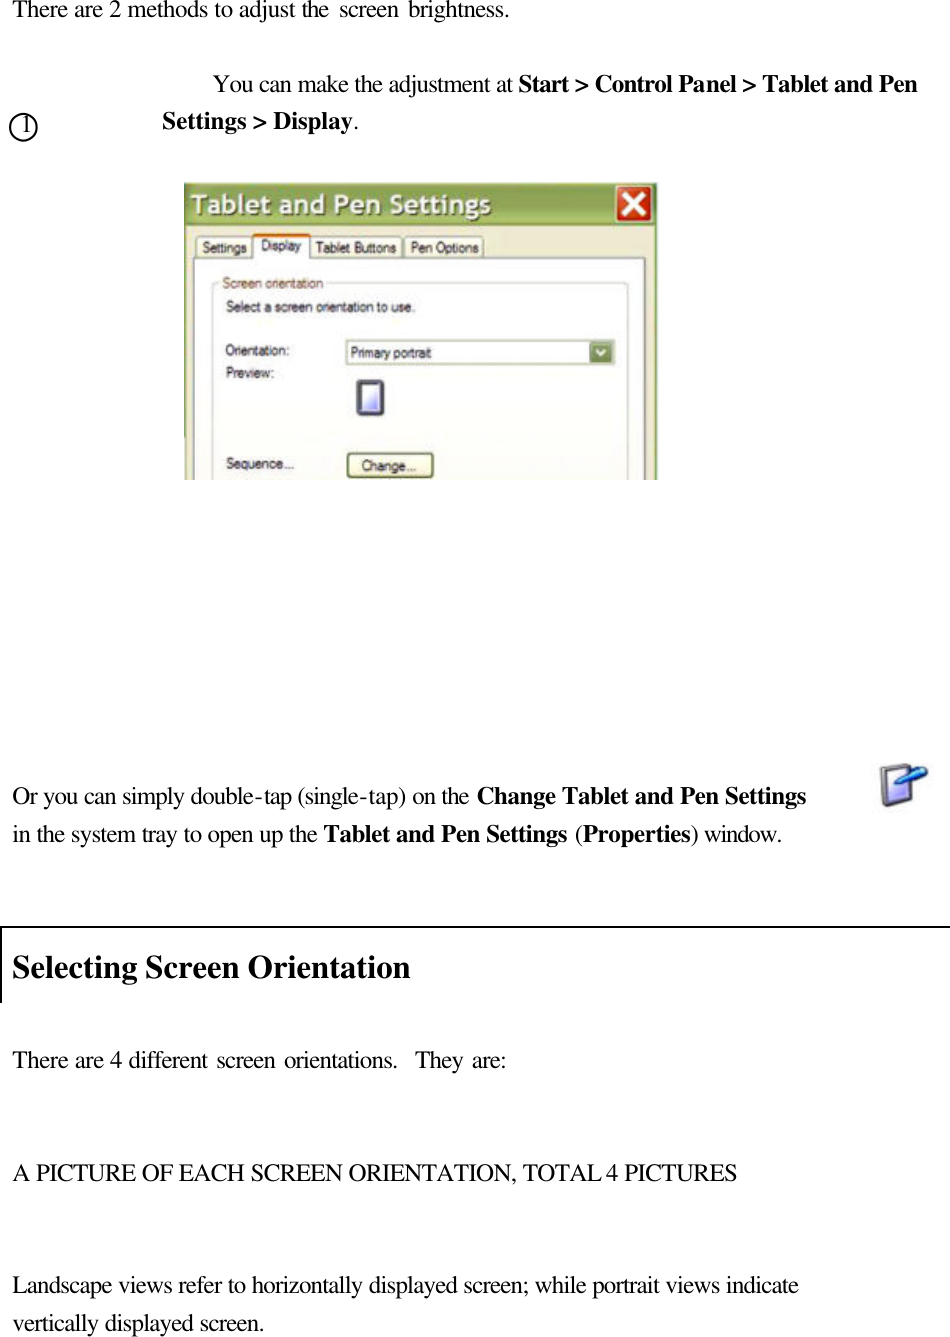   There are 2 methods to adjust the screen brightness.    You can make the adjustment at Start &gt; Control Panel &gt; Tablet and Pen Settings &gt; Display.                     Or you can simply double-tap (single-tap) on the Change Tablet and Pen Settings        in the system tray to open up the Tablet and Pen Settings (Properties) window.   Selecting Screen Orientation  There are 4 different screen orientations.  They are:   A PICTURE OF EACH SCREEN ORIENTATION, TOTAL 4 PICTURES   Landscape views refer to horizontally displayed screen; while portrait views indicate vertically displayed screen.    ○1 